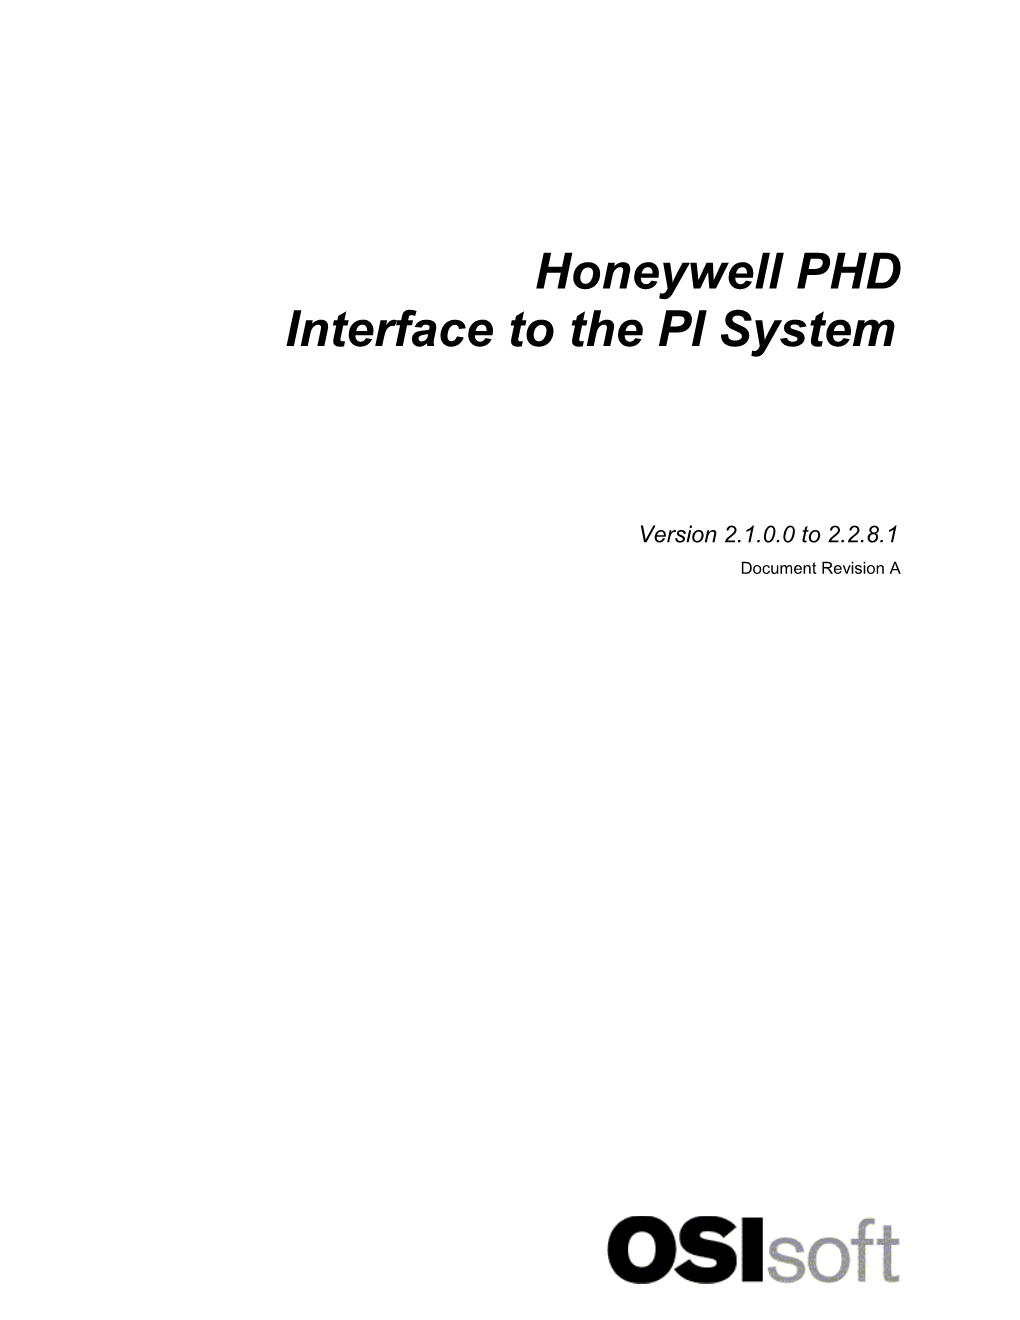 Honeywell PHD Interface to the PI System